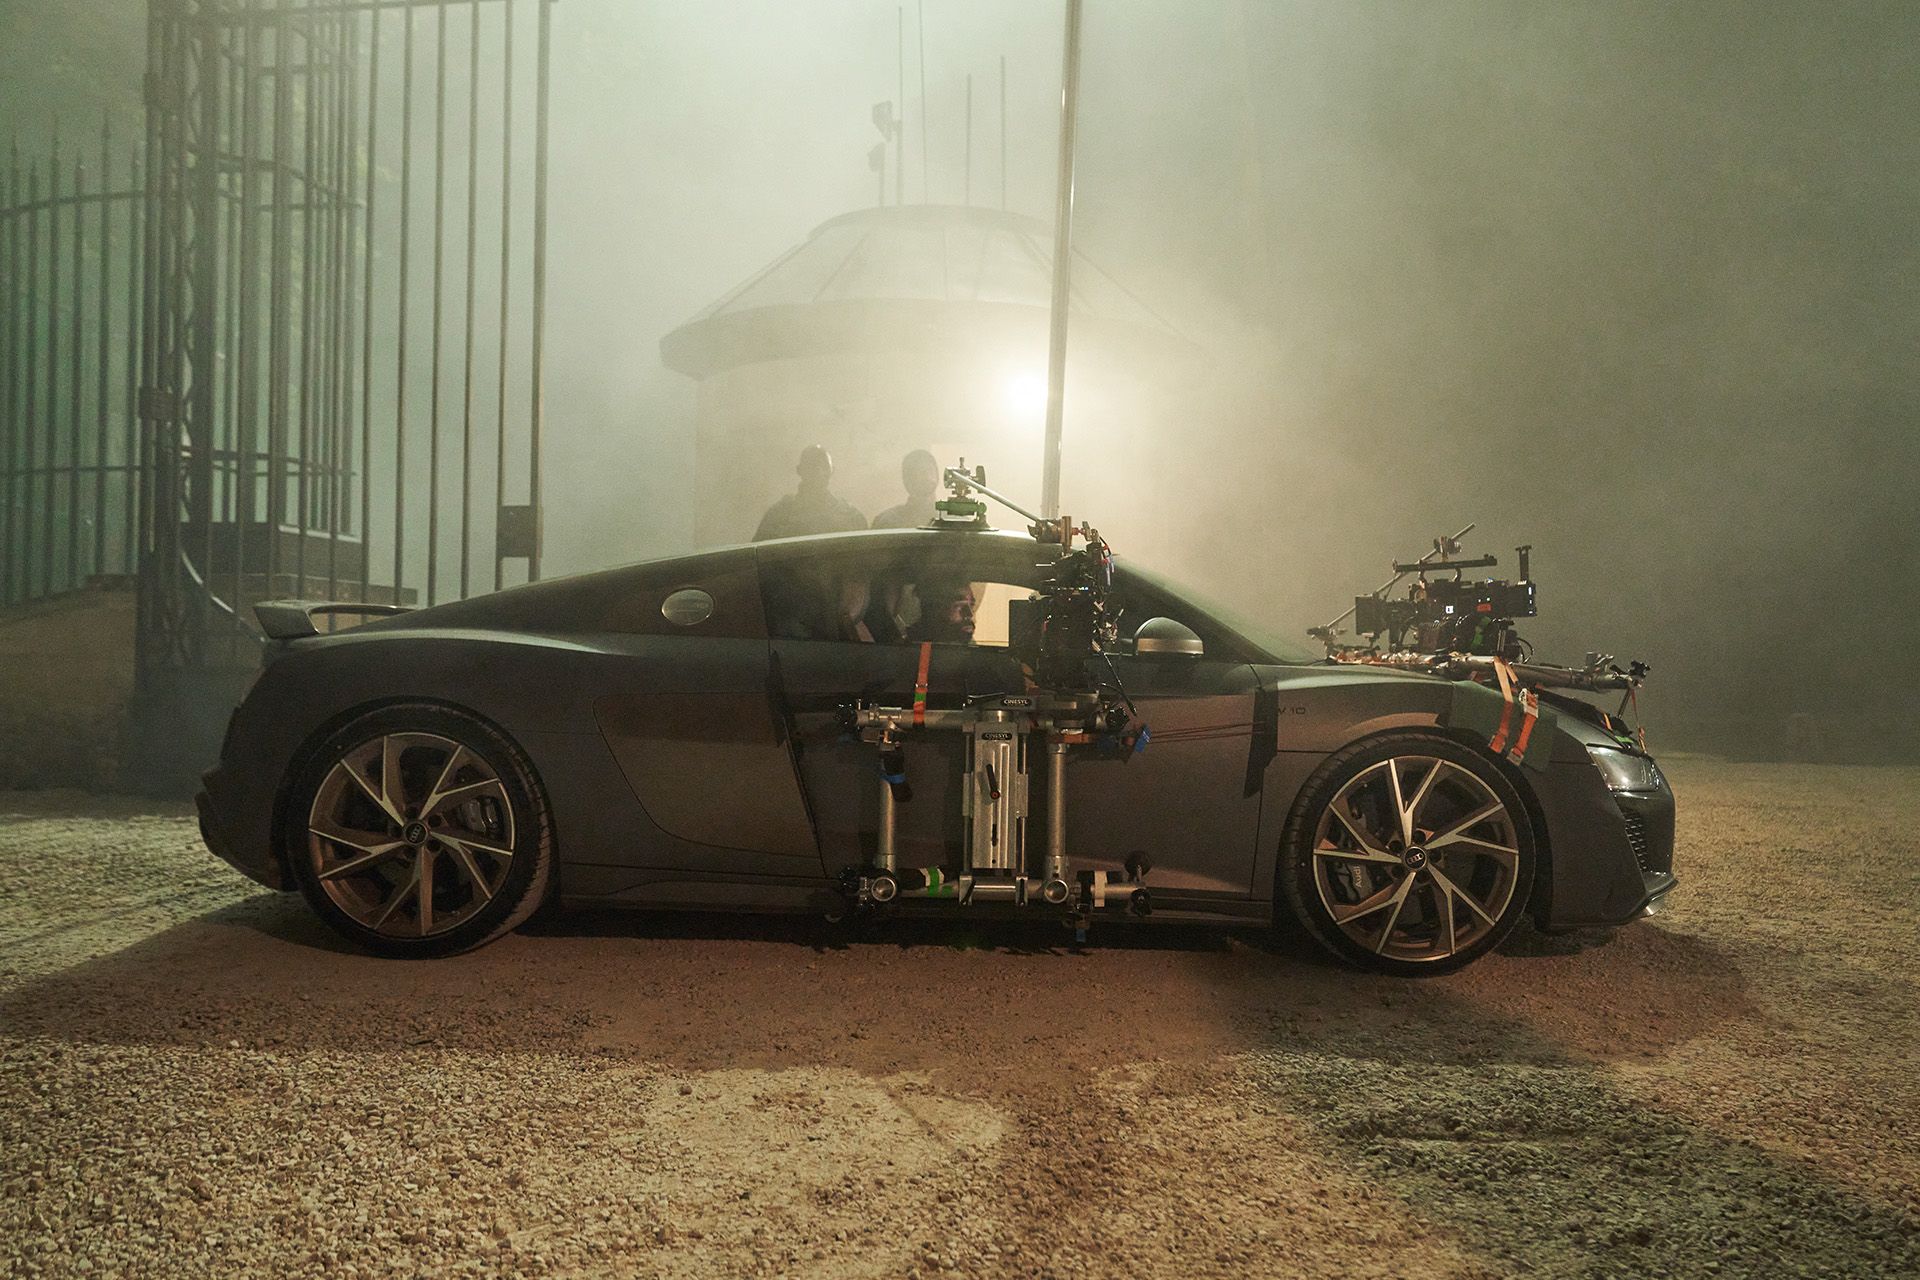 A black Audi R8 V10 can be seen from the side. Various camera systems are mounted on the body.